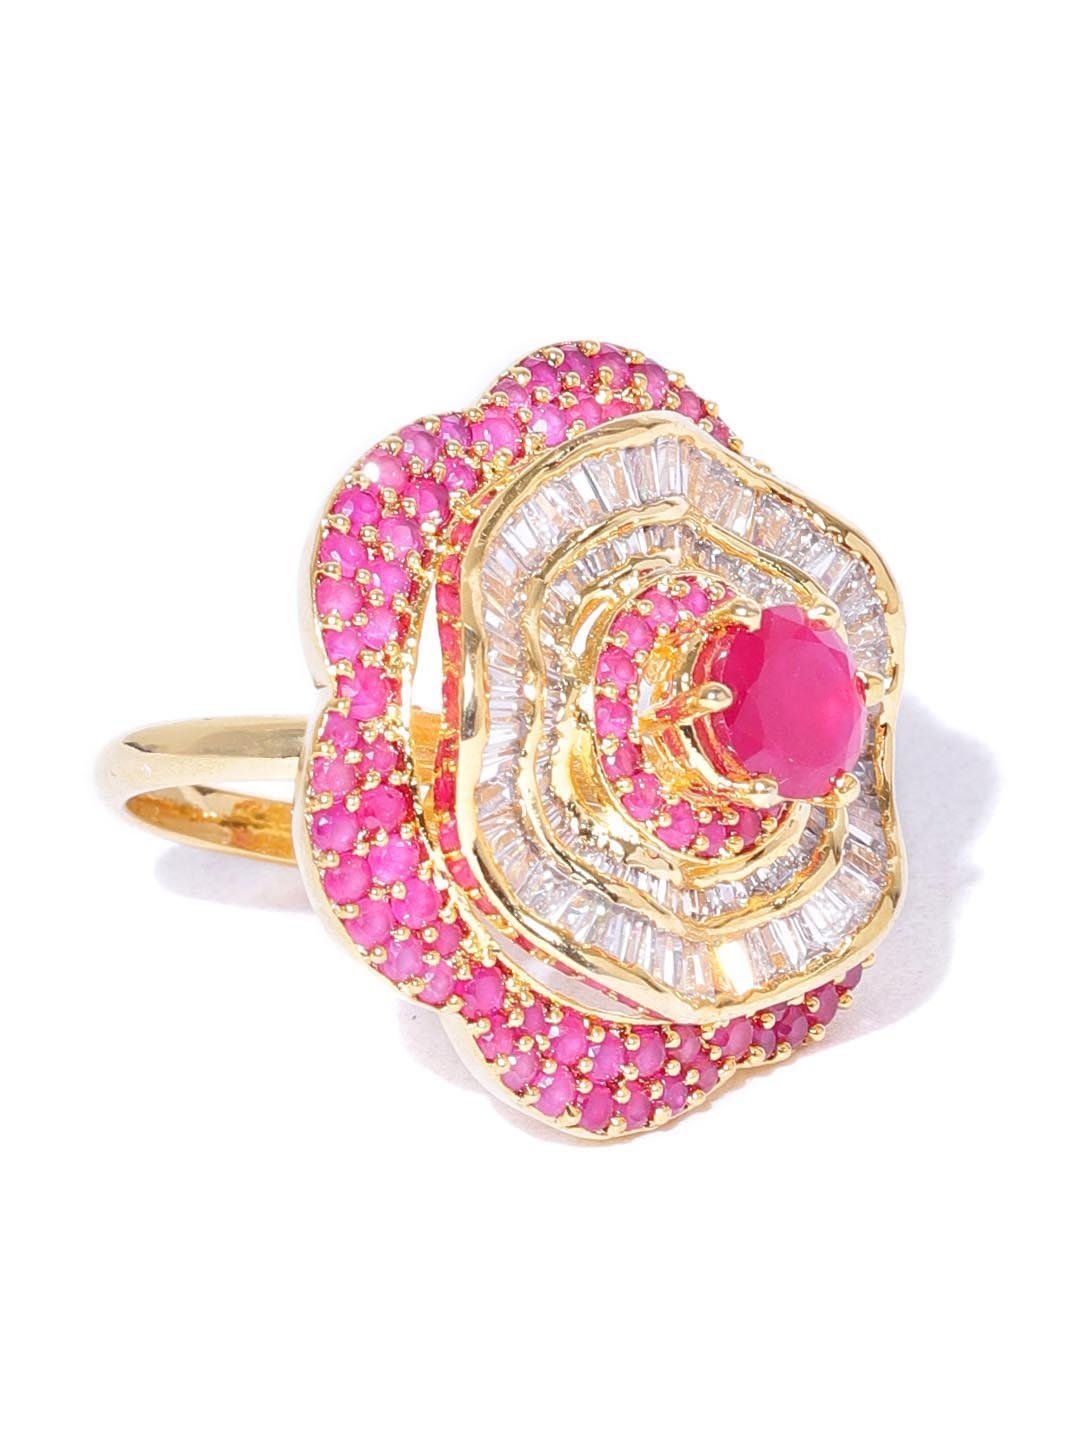 Women's Stylish Floral Shaped Pink And White American Diamond Ring For Women And Girls - Priyaasi